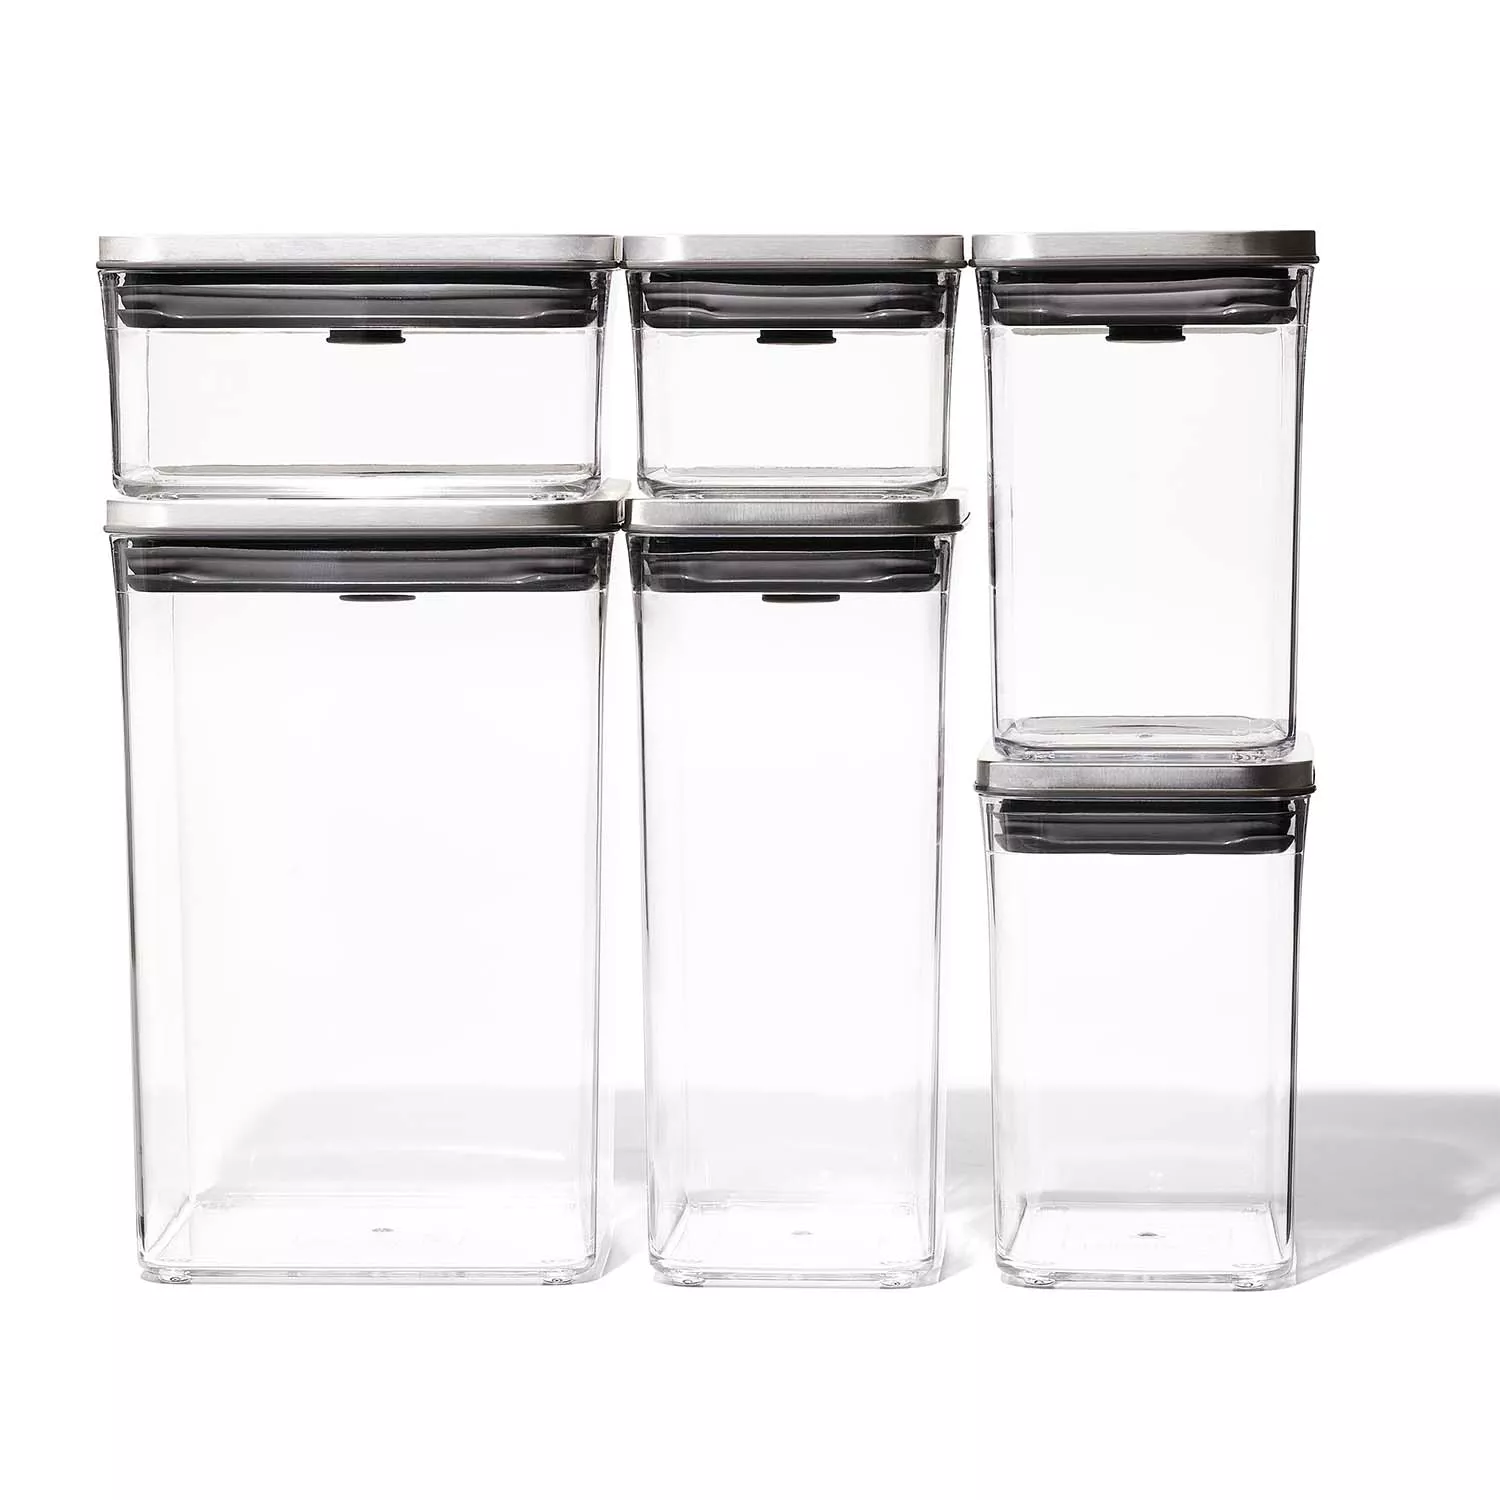 OXO's Borosilicate Glass POP Containers Exclusively at Sur La Table